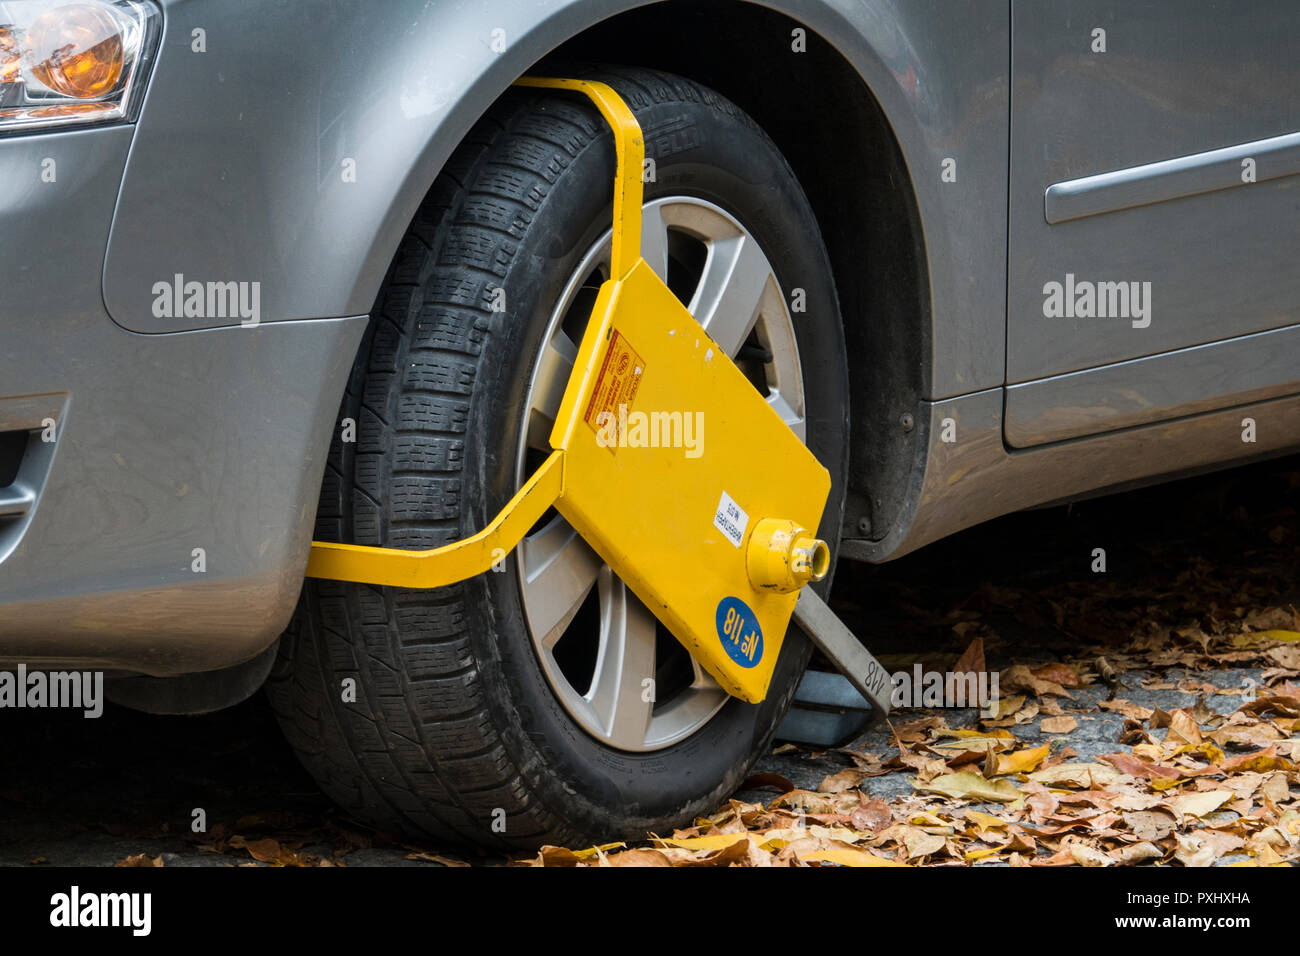 Yellow wheel clamp on parked car in Plovdiv, Bulgaria Stock Photo